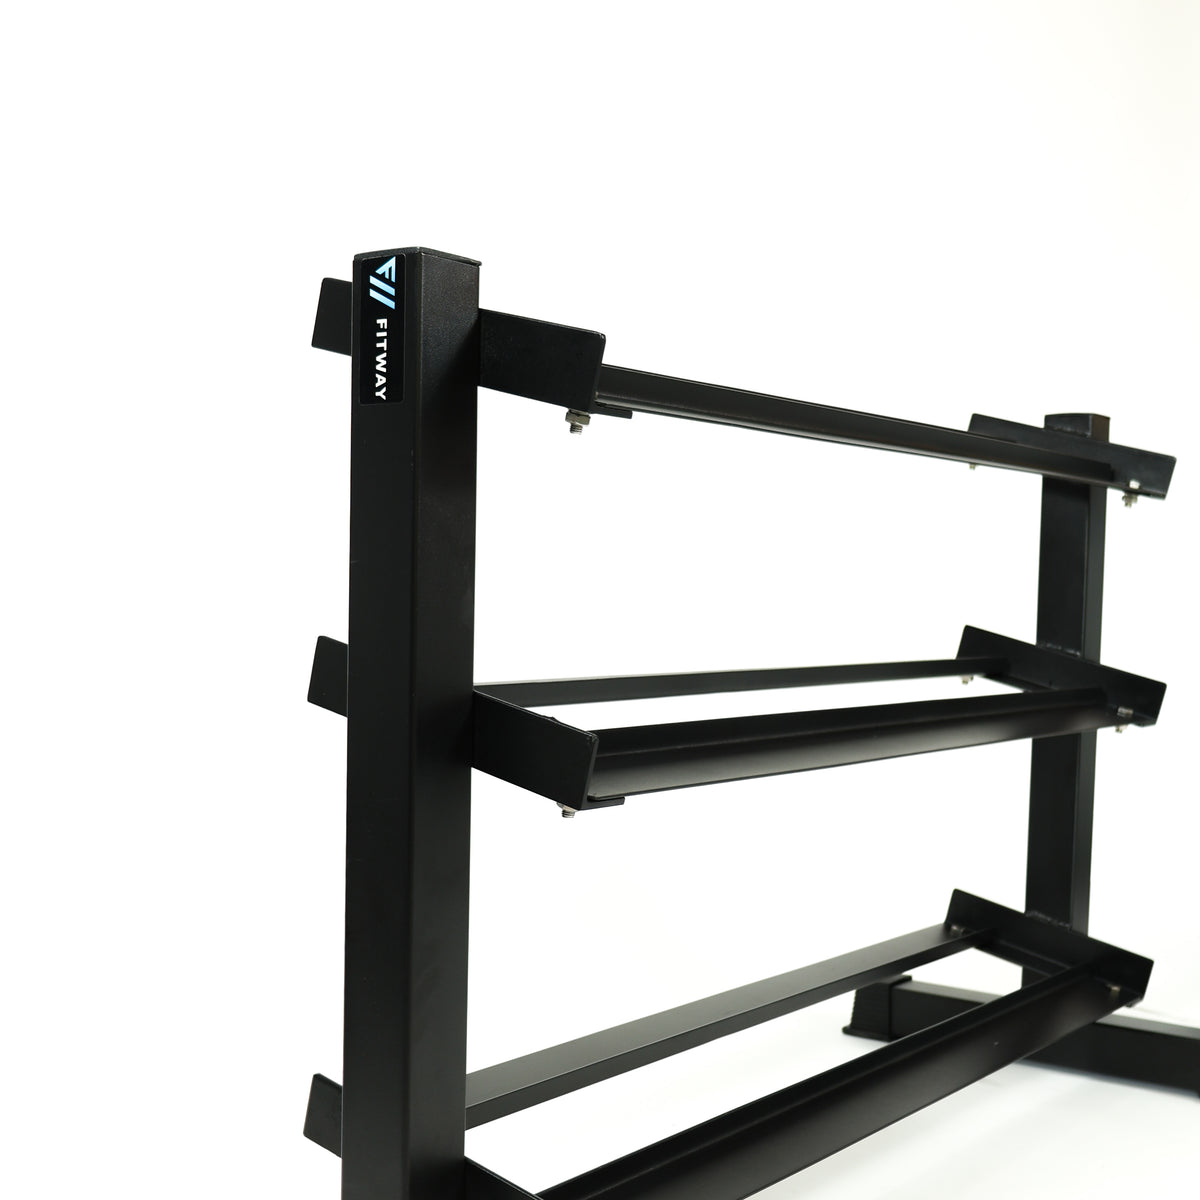 Close up of Fitway 3 tier dumbbell rack that holds 5-50 lb dumbbell set